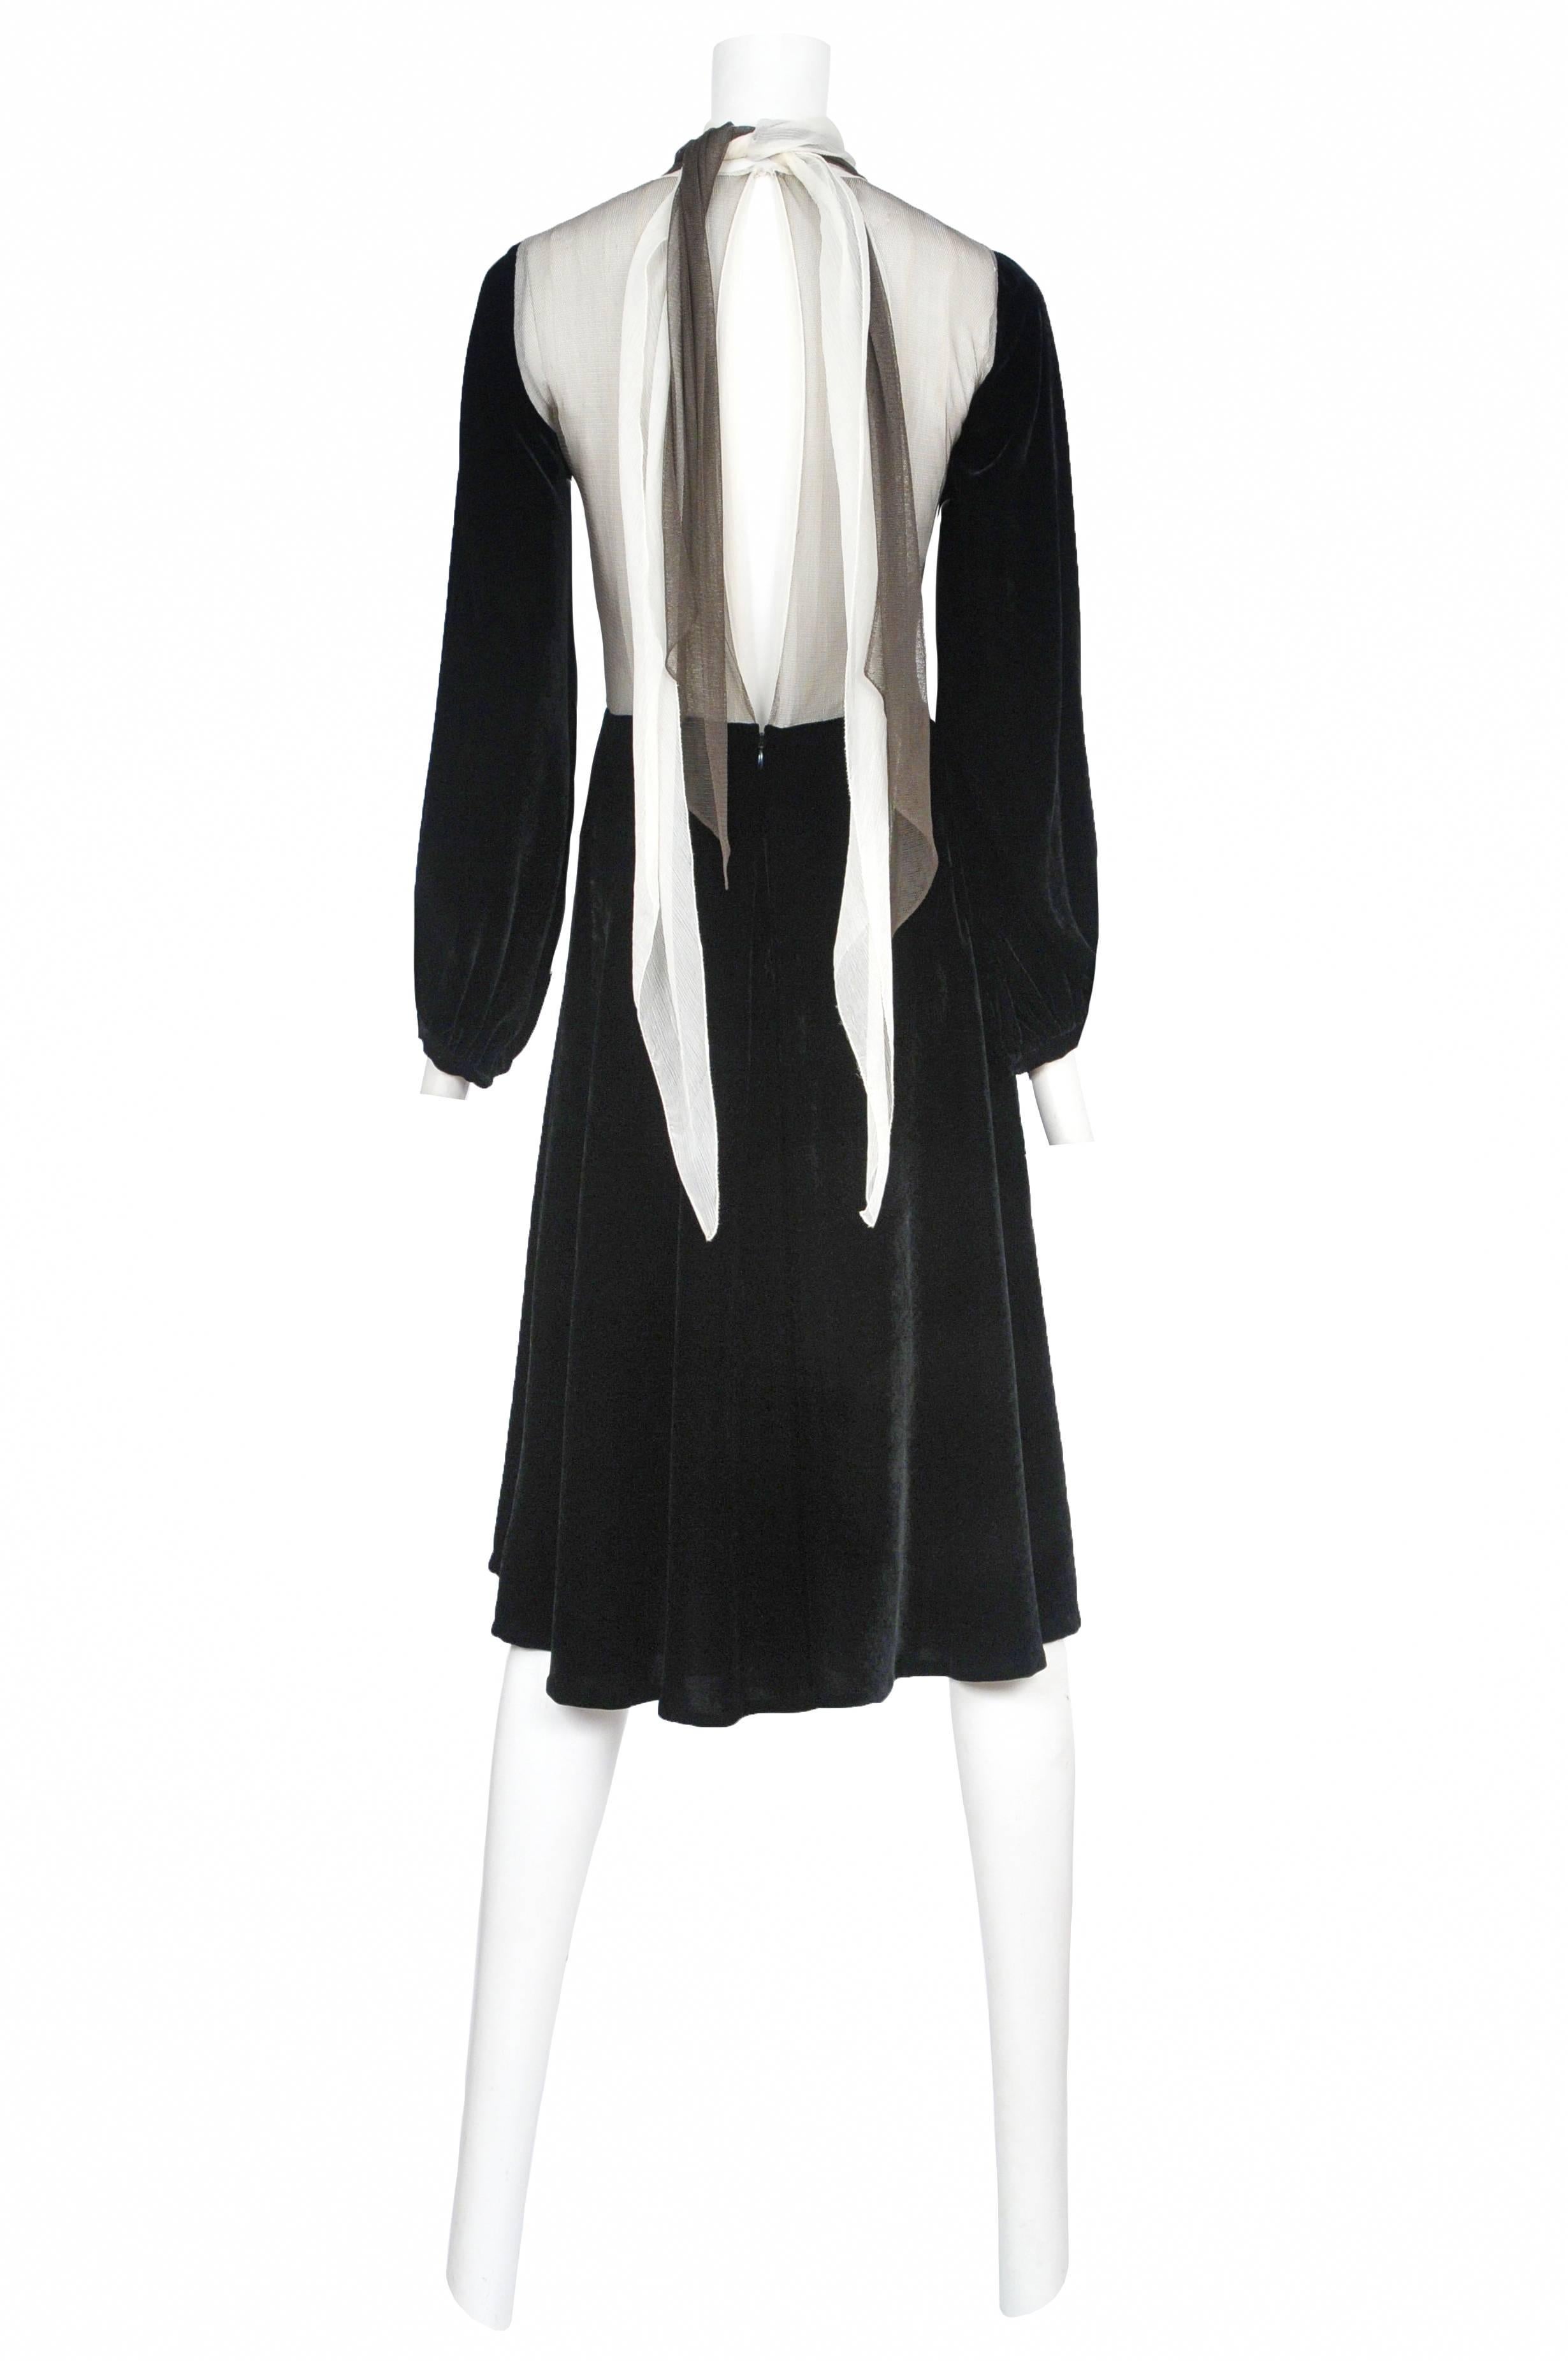 Vintage Jean Paul Gaultier black velvet dress featuring ivory mesh at the front torso, an ivory and black attached scarf that ties at the neck and a permanent heart shaped crystal brooch that hides under the mesh at the front chest.